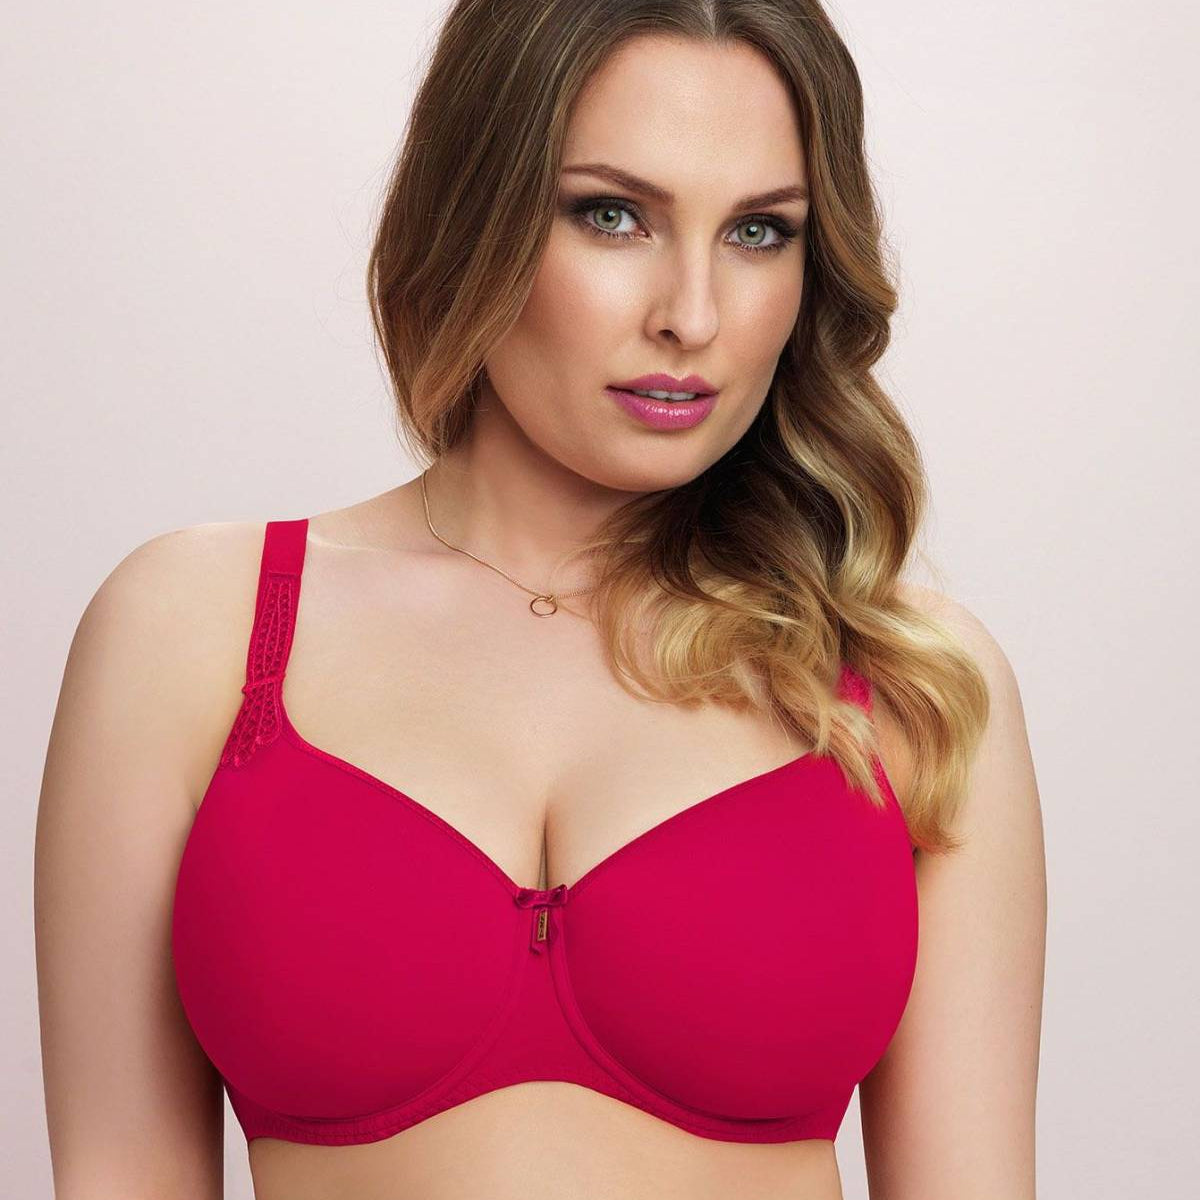 CORA SET ✨ Matching bra and panty set Size 34B - 38C Color : red